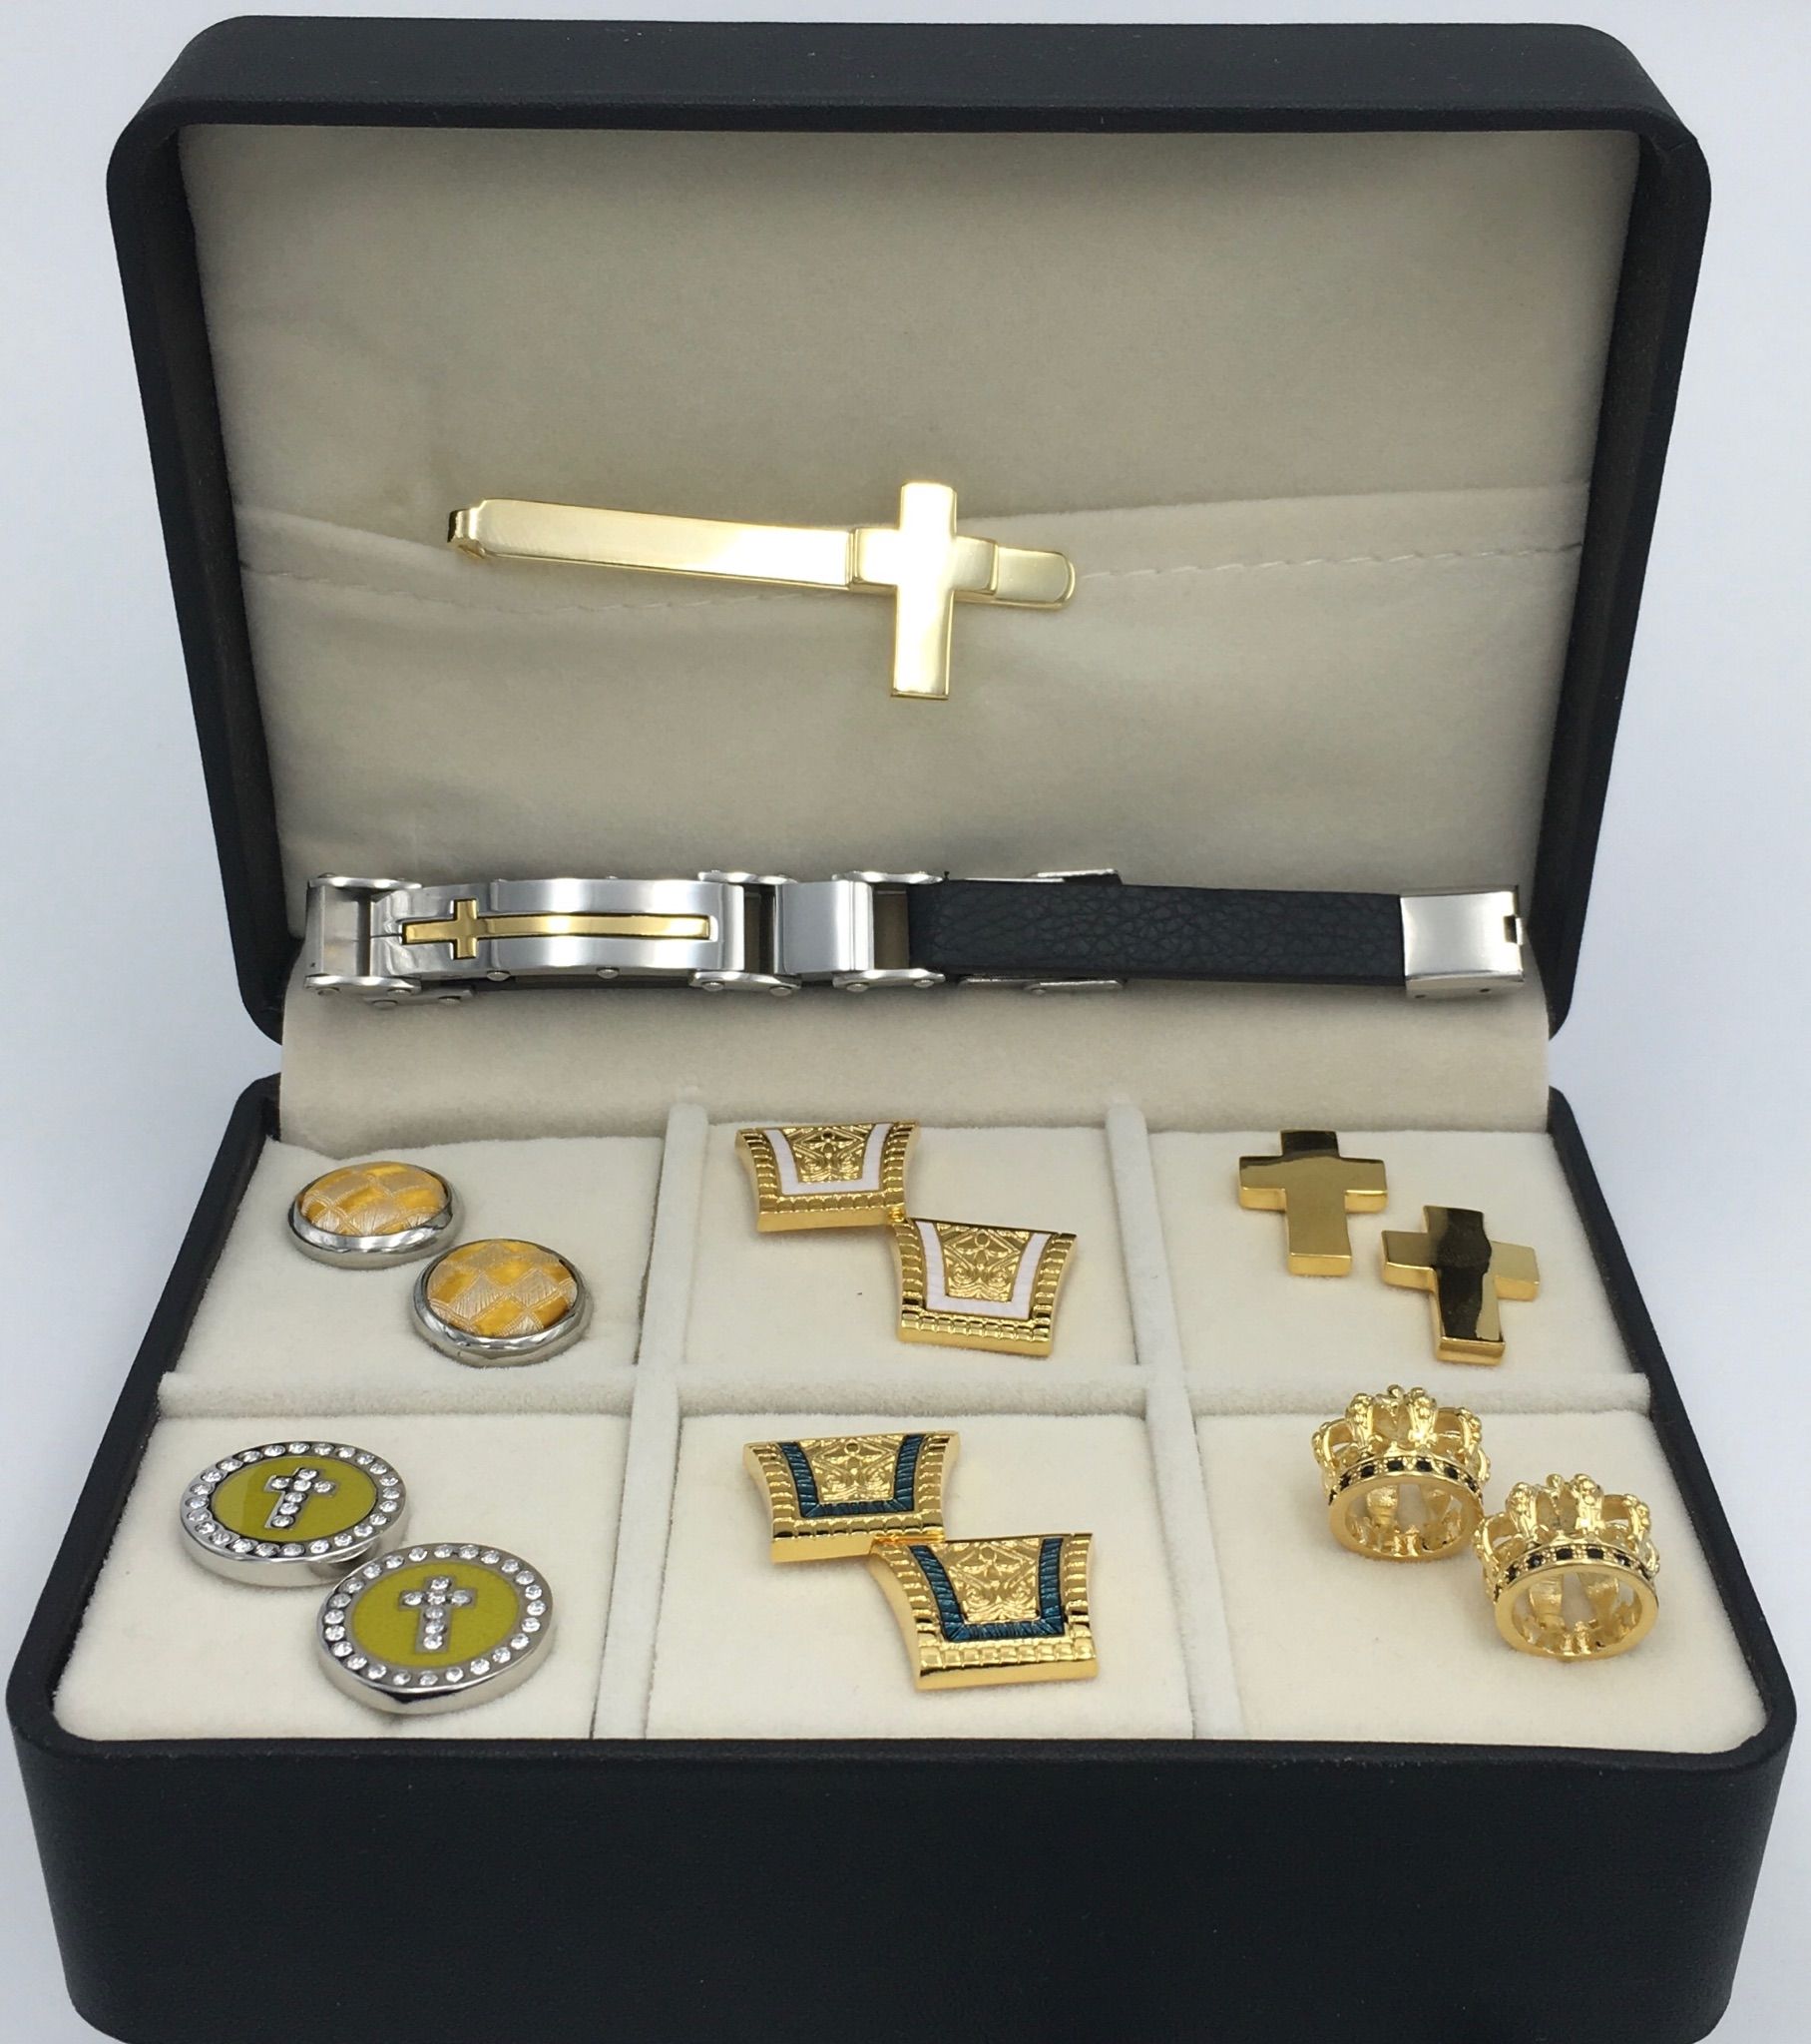 The Max Box 6 Different Pairs of Cufflinks, Tie Bar and Clergy Bracelet